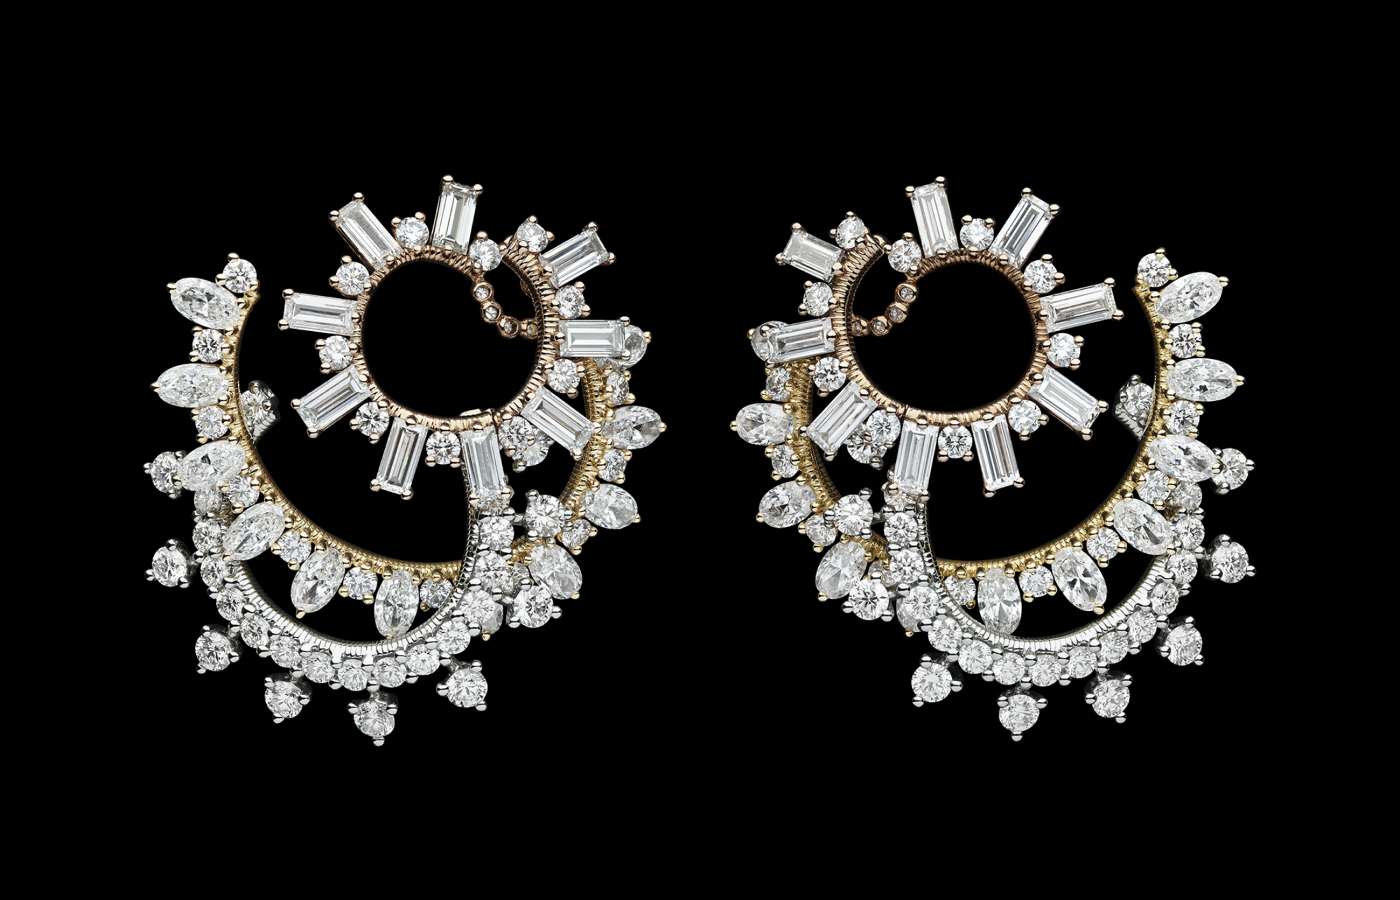 Dior Delicat high jewellery earrings in gold, white gold and diamond by Dior Joaillerie